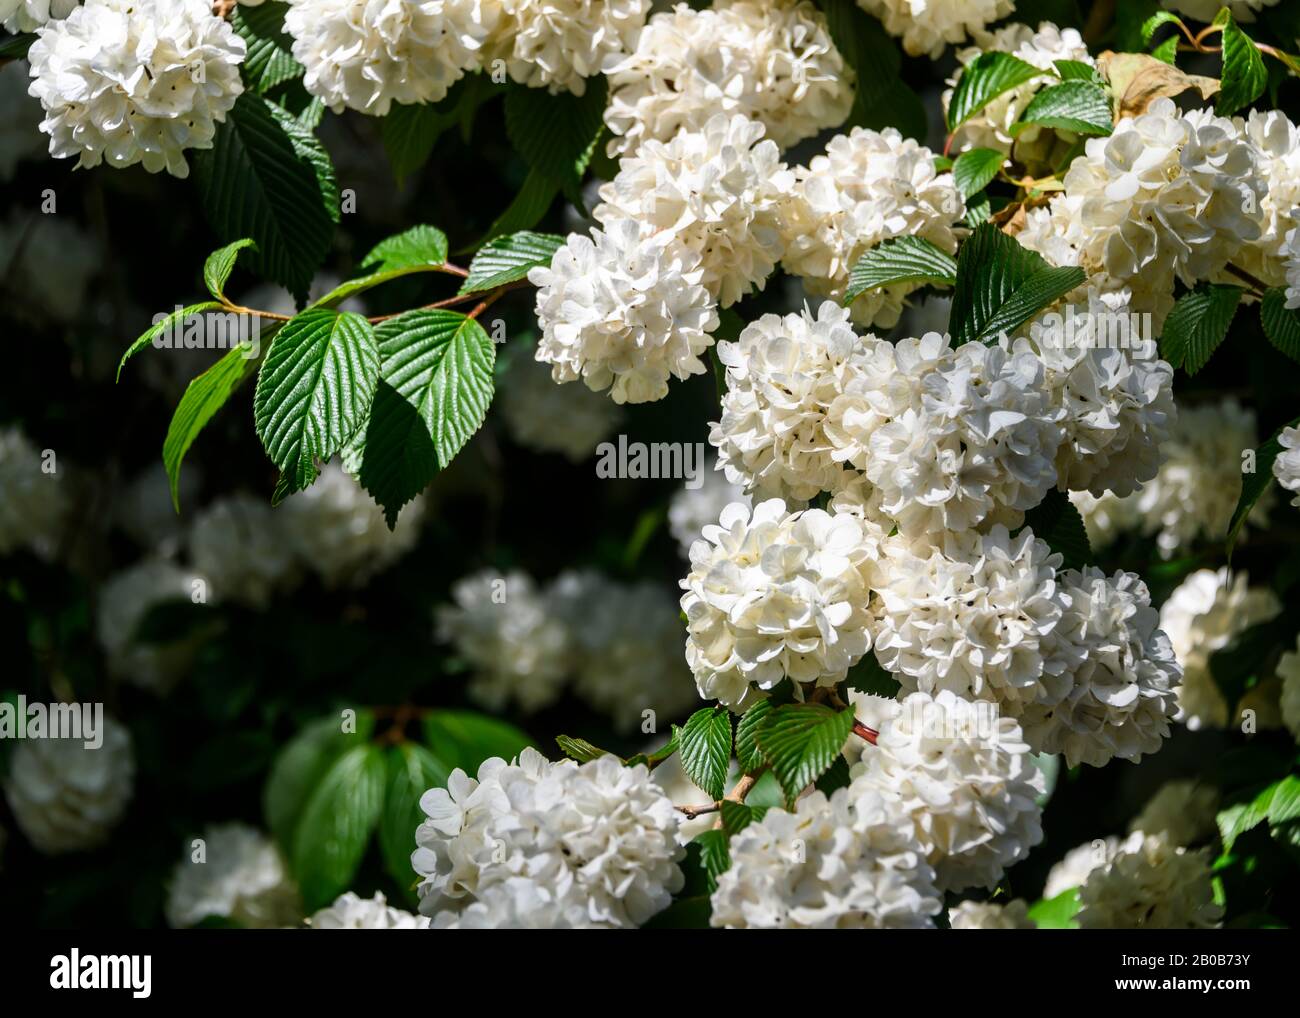 Beautiful white rhododendron blooming in the spring. Green leaves and branches background. Blurred background. Intense flower. Very vibrant and colorf Stock Photo